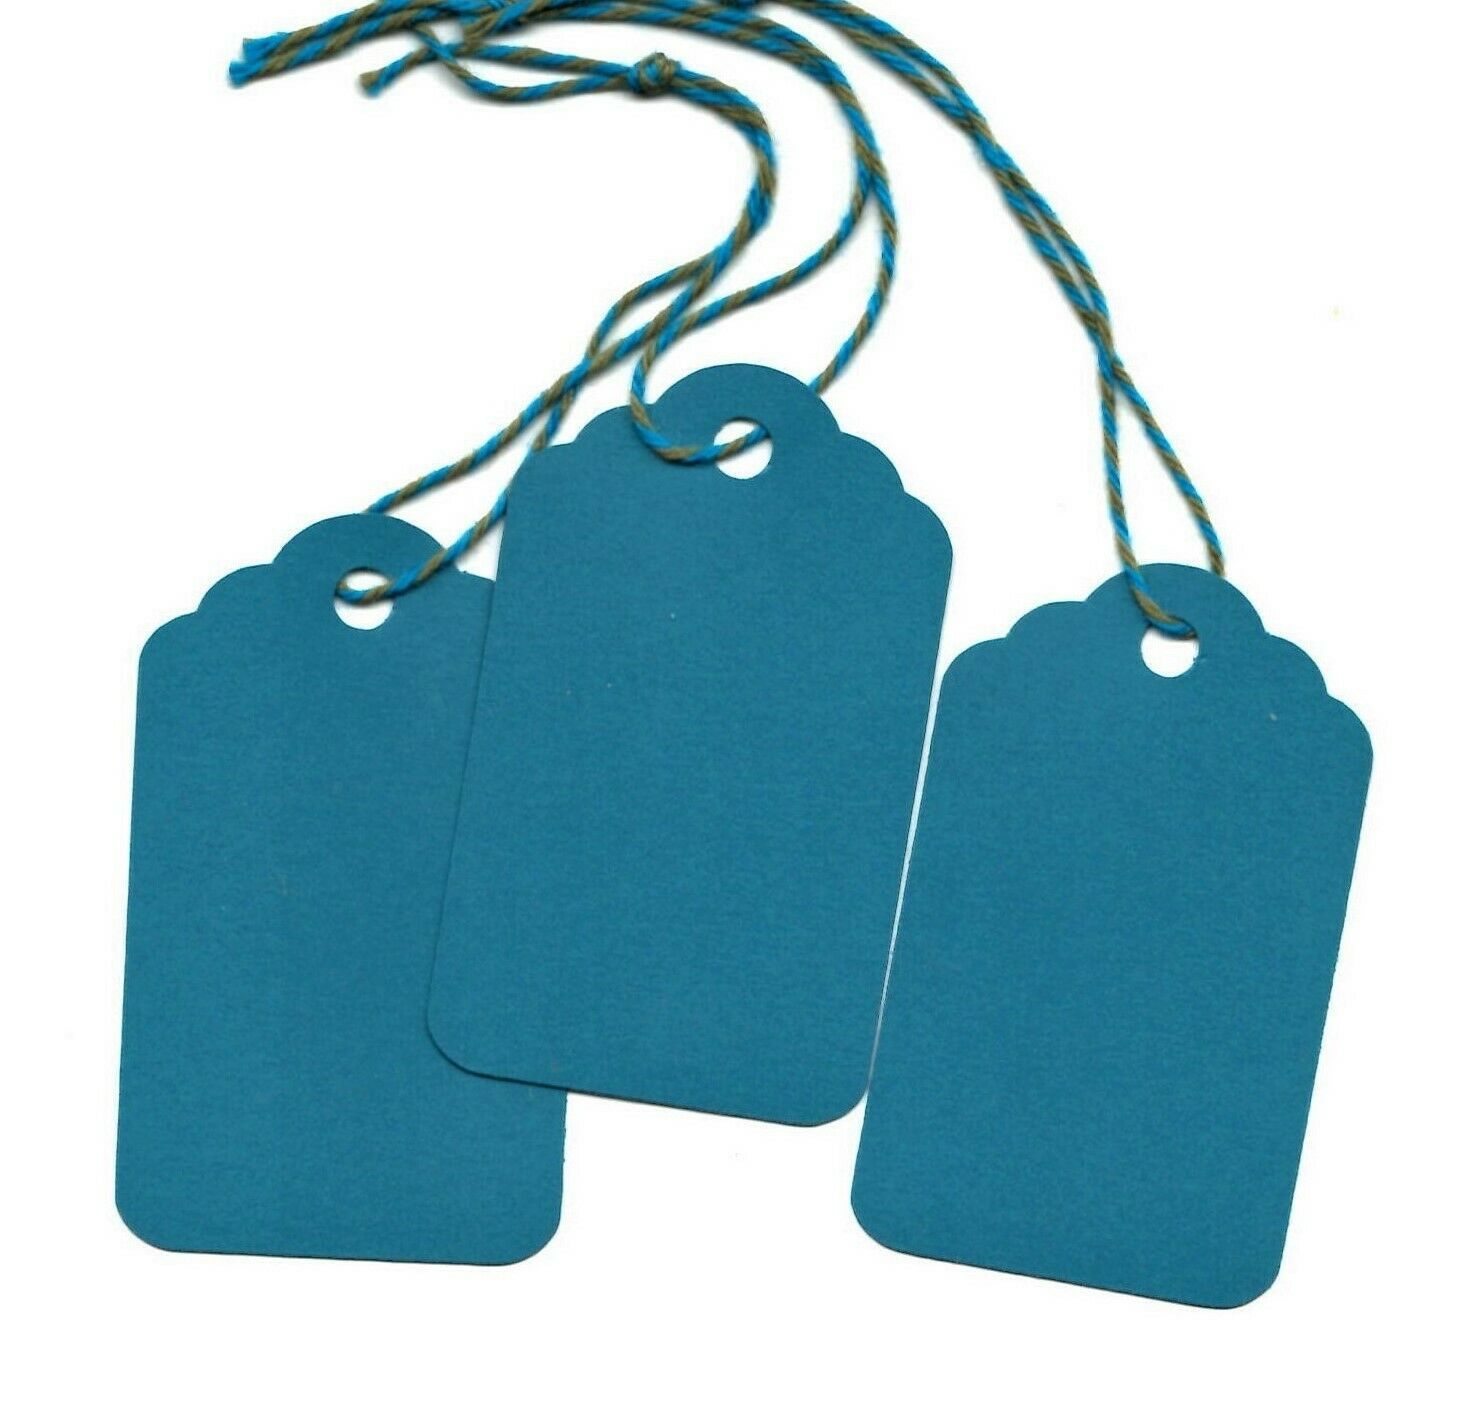 50 Blank Scalloped Gift Tags W/ Strings - Teal Blue - Strung Handmade Hang Price